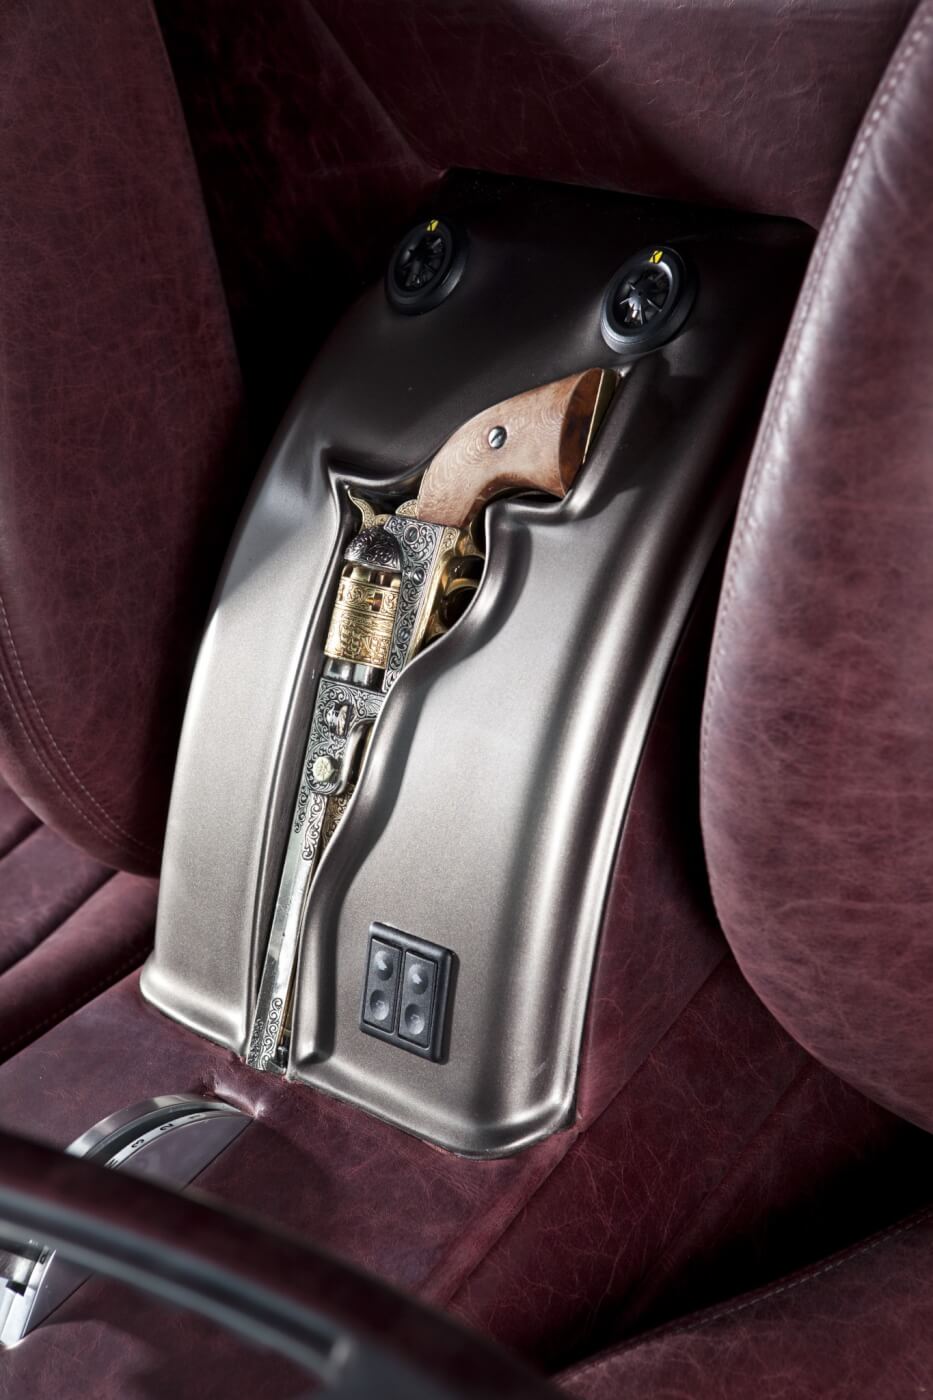 The custom center console, seen here, is fitted with an antique 1845 Colt revolver.